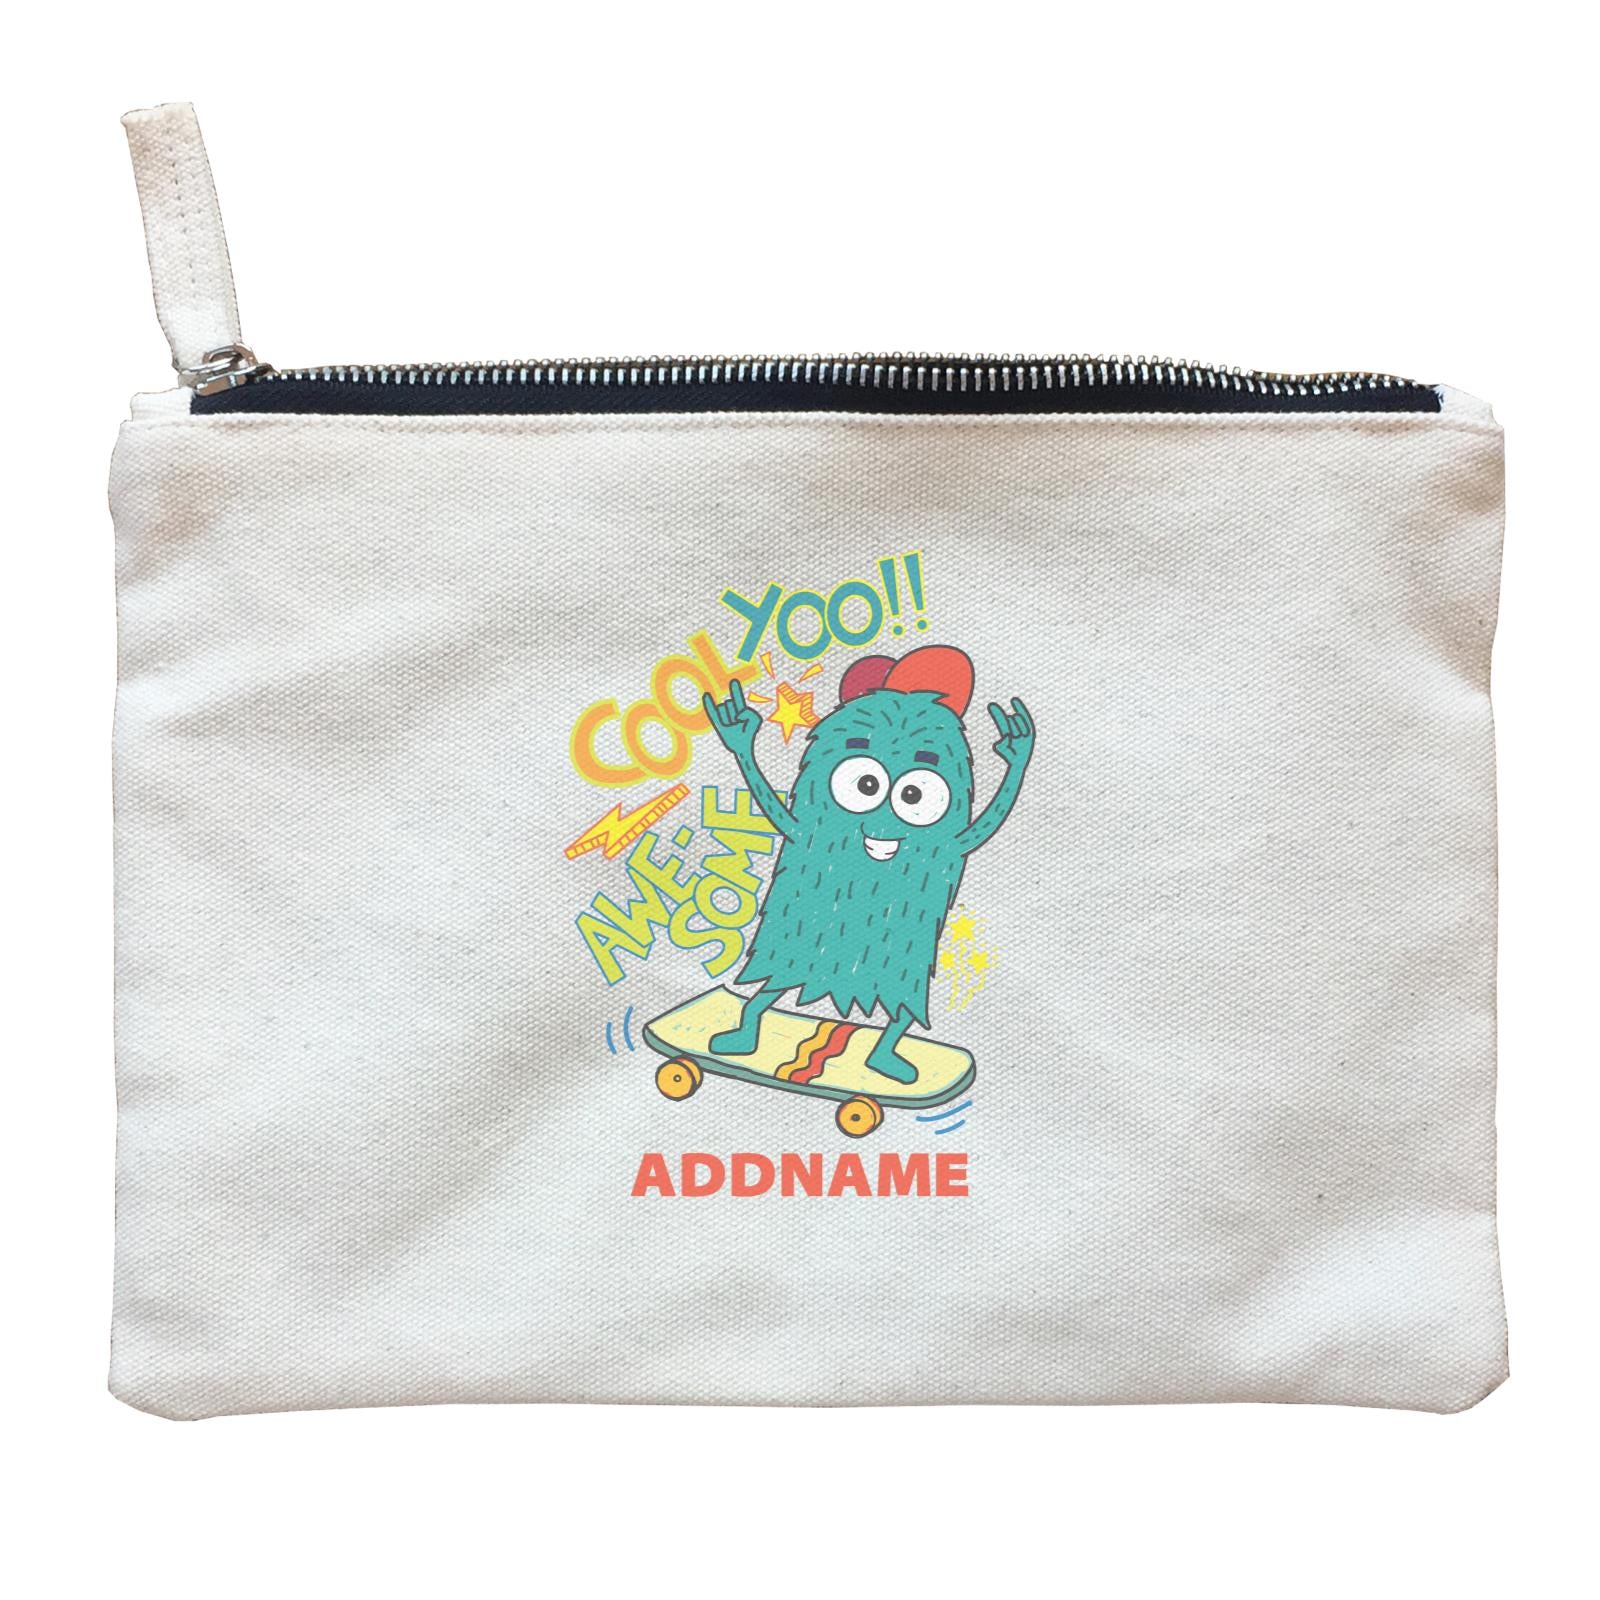 Cool Cute Monster Cool Yoo Awesome Skateboard Monster Addname Zipper Pouch